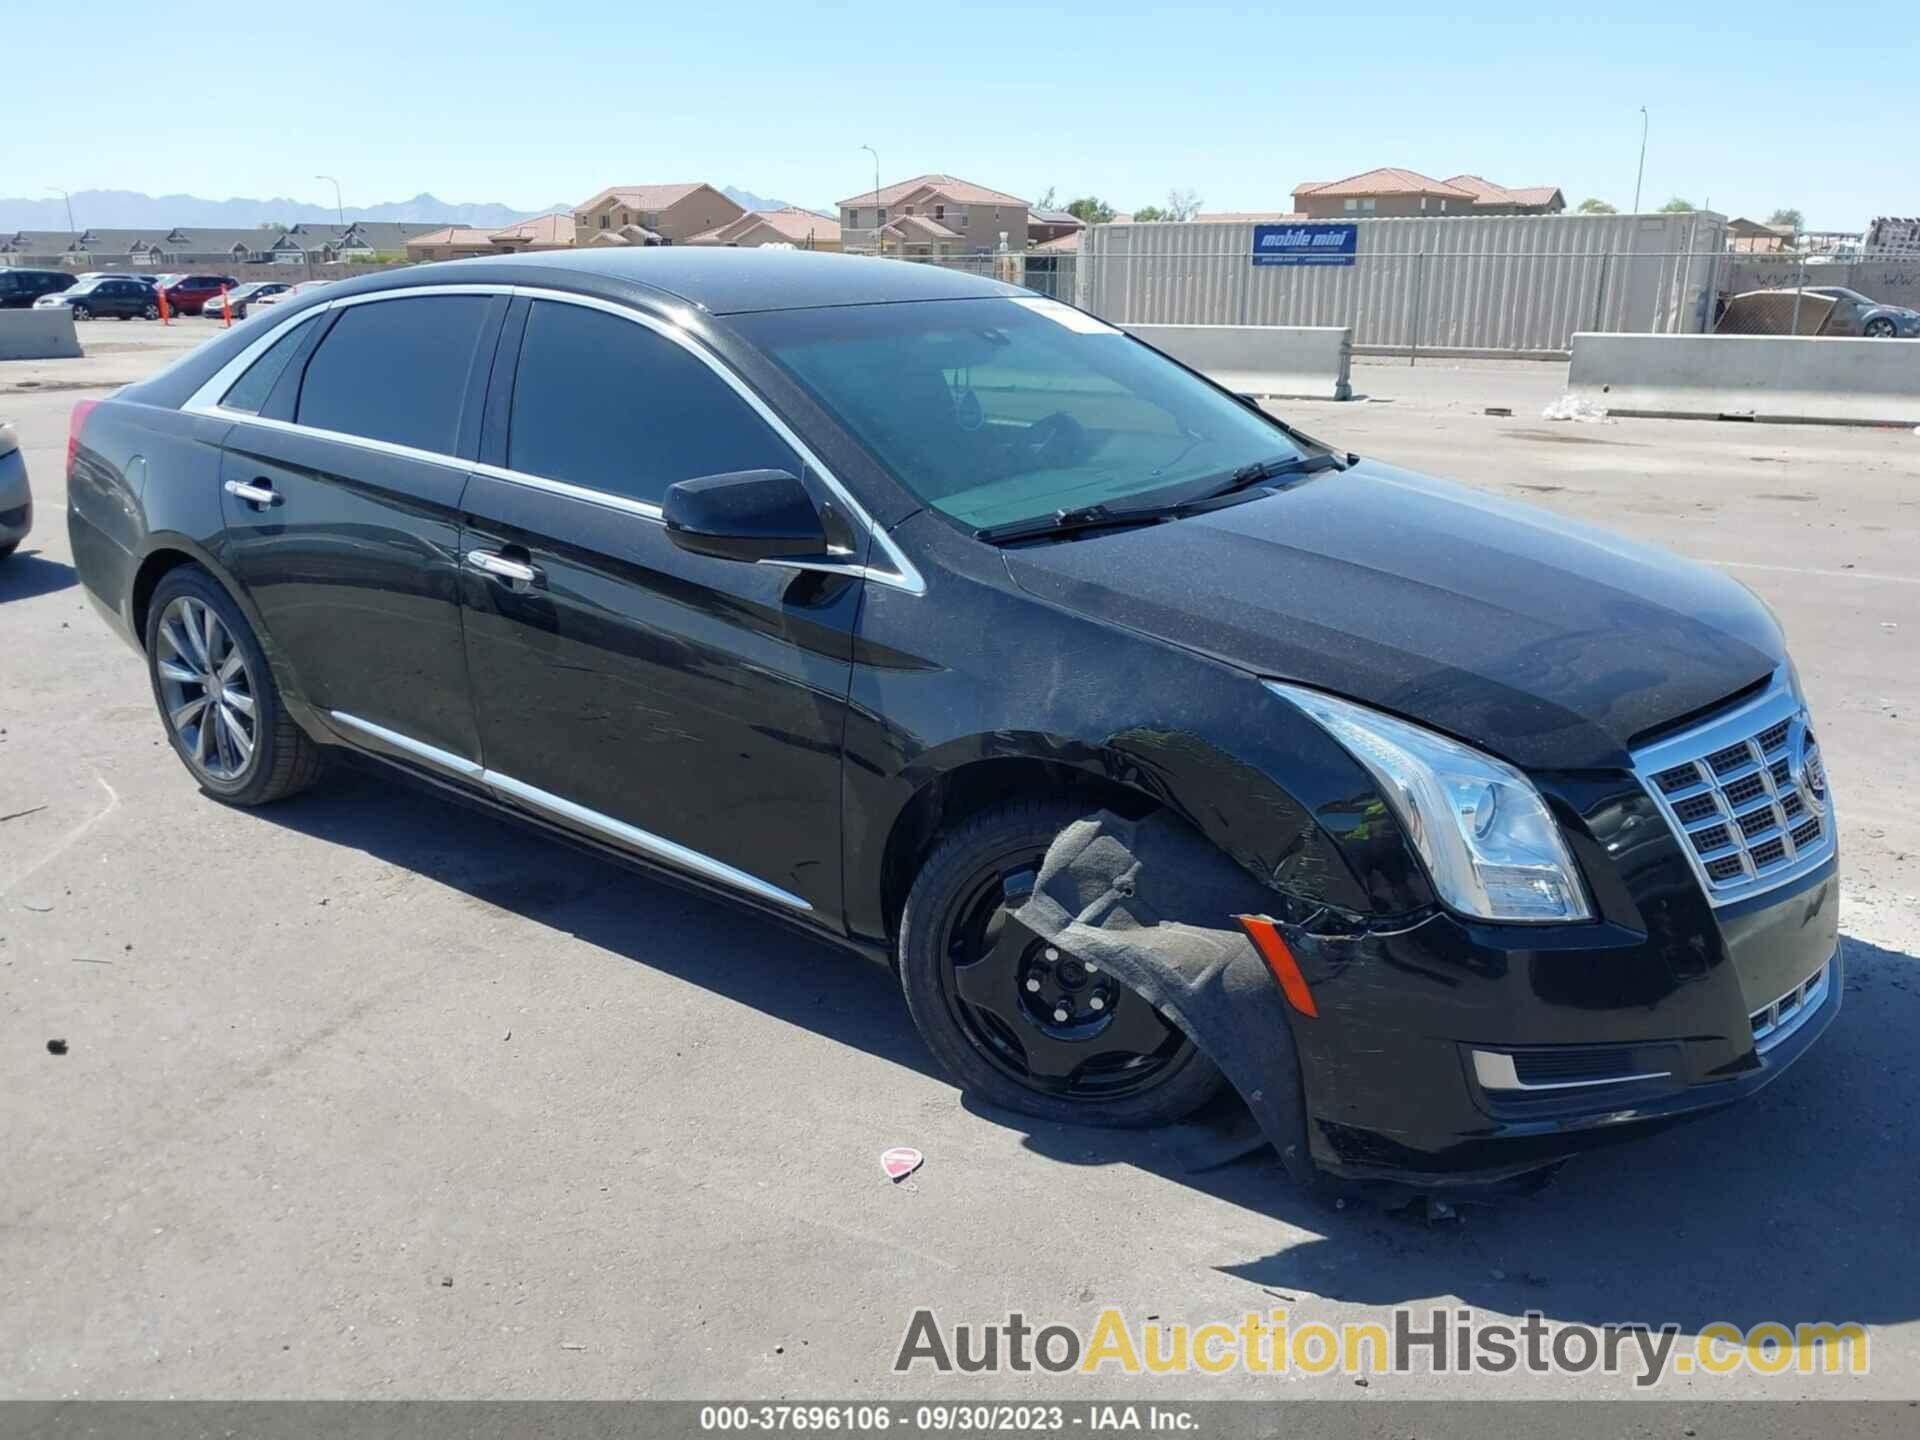 CADILLAC XTS LIVERY PACKAGE, 2G61U5S3XE9292964